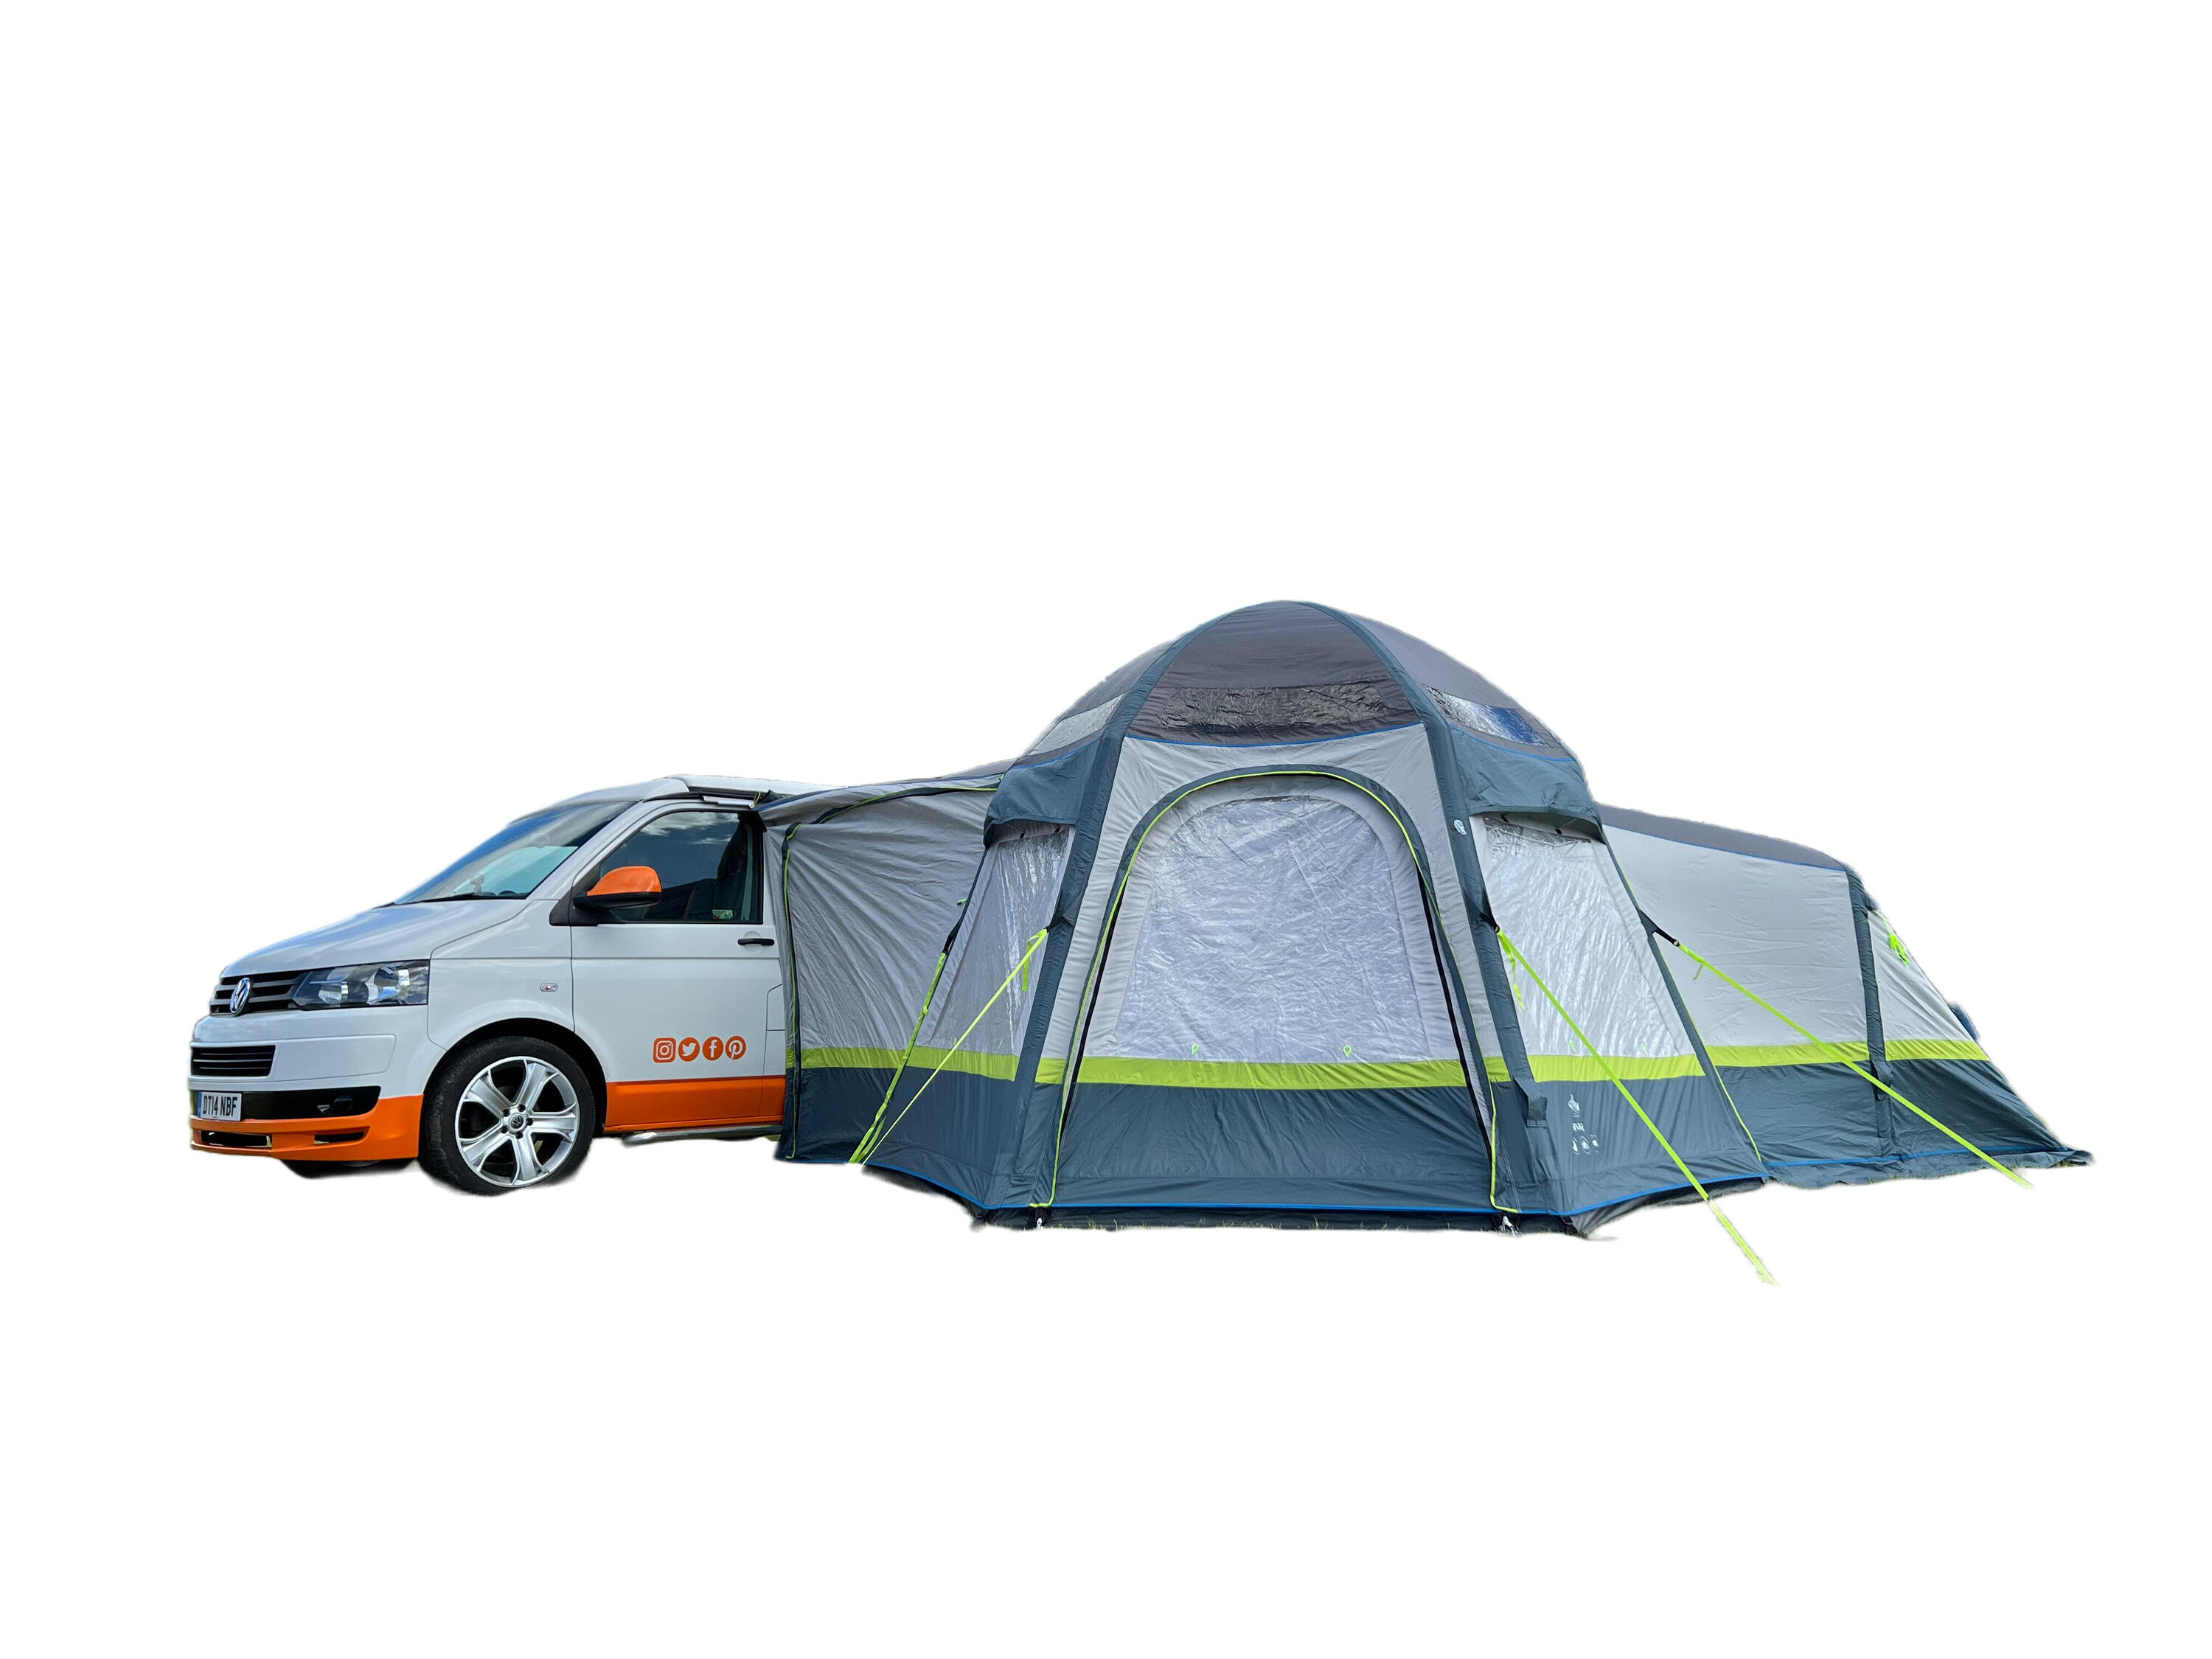 OLPRO OLPRO Hive Breeze - Inflatable Campervan Awning (With Sleeping Pod)